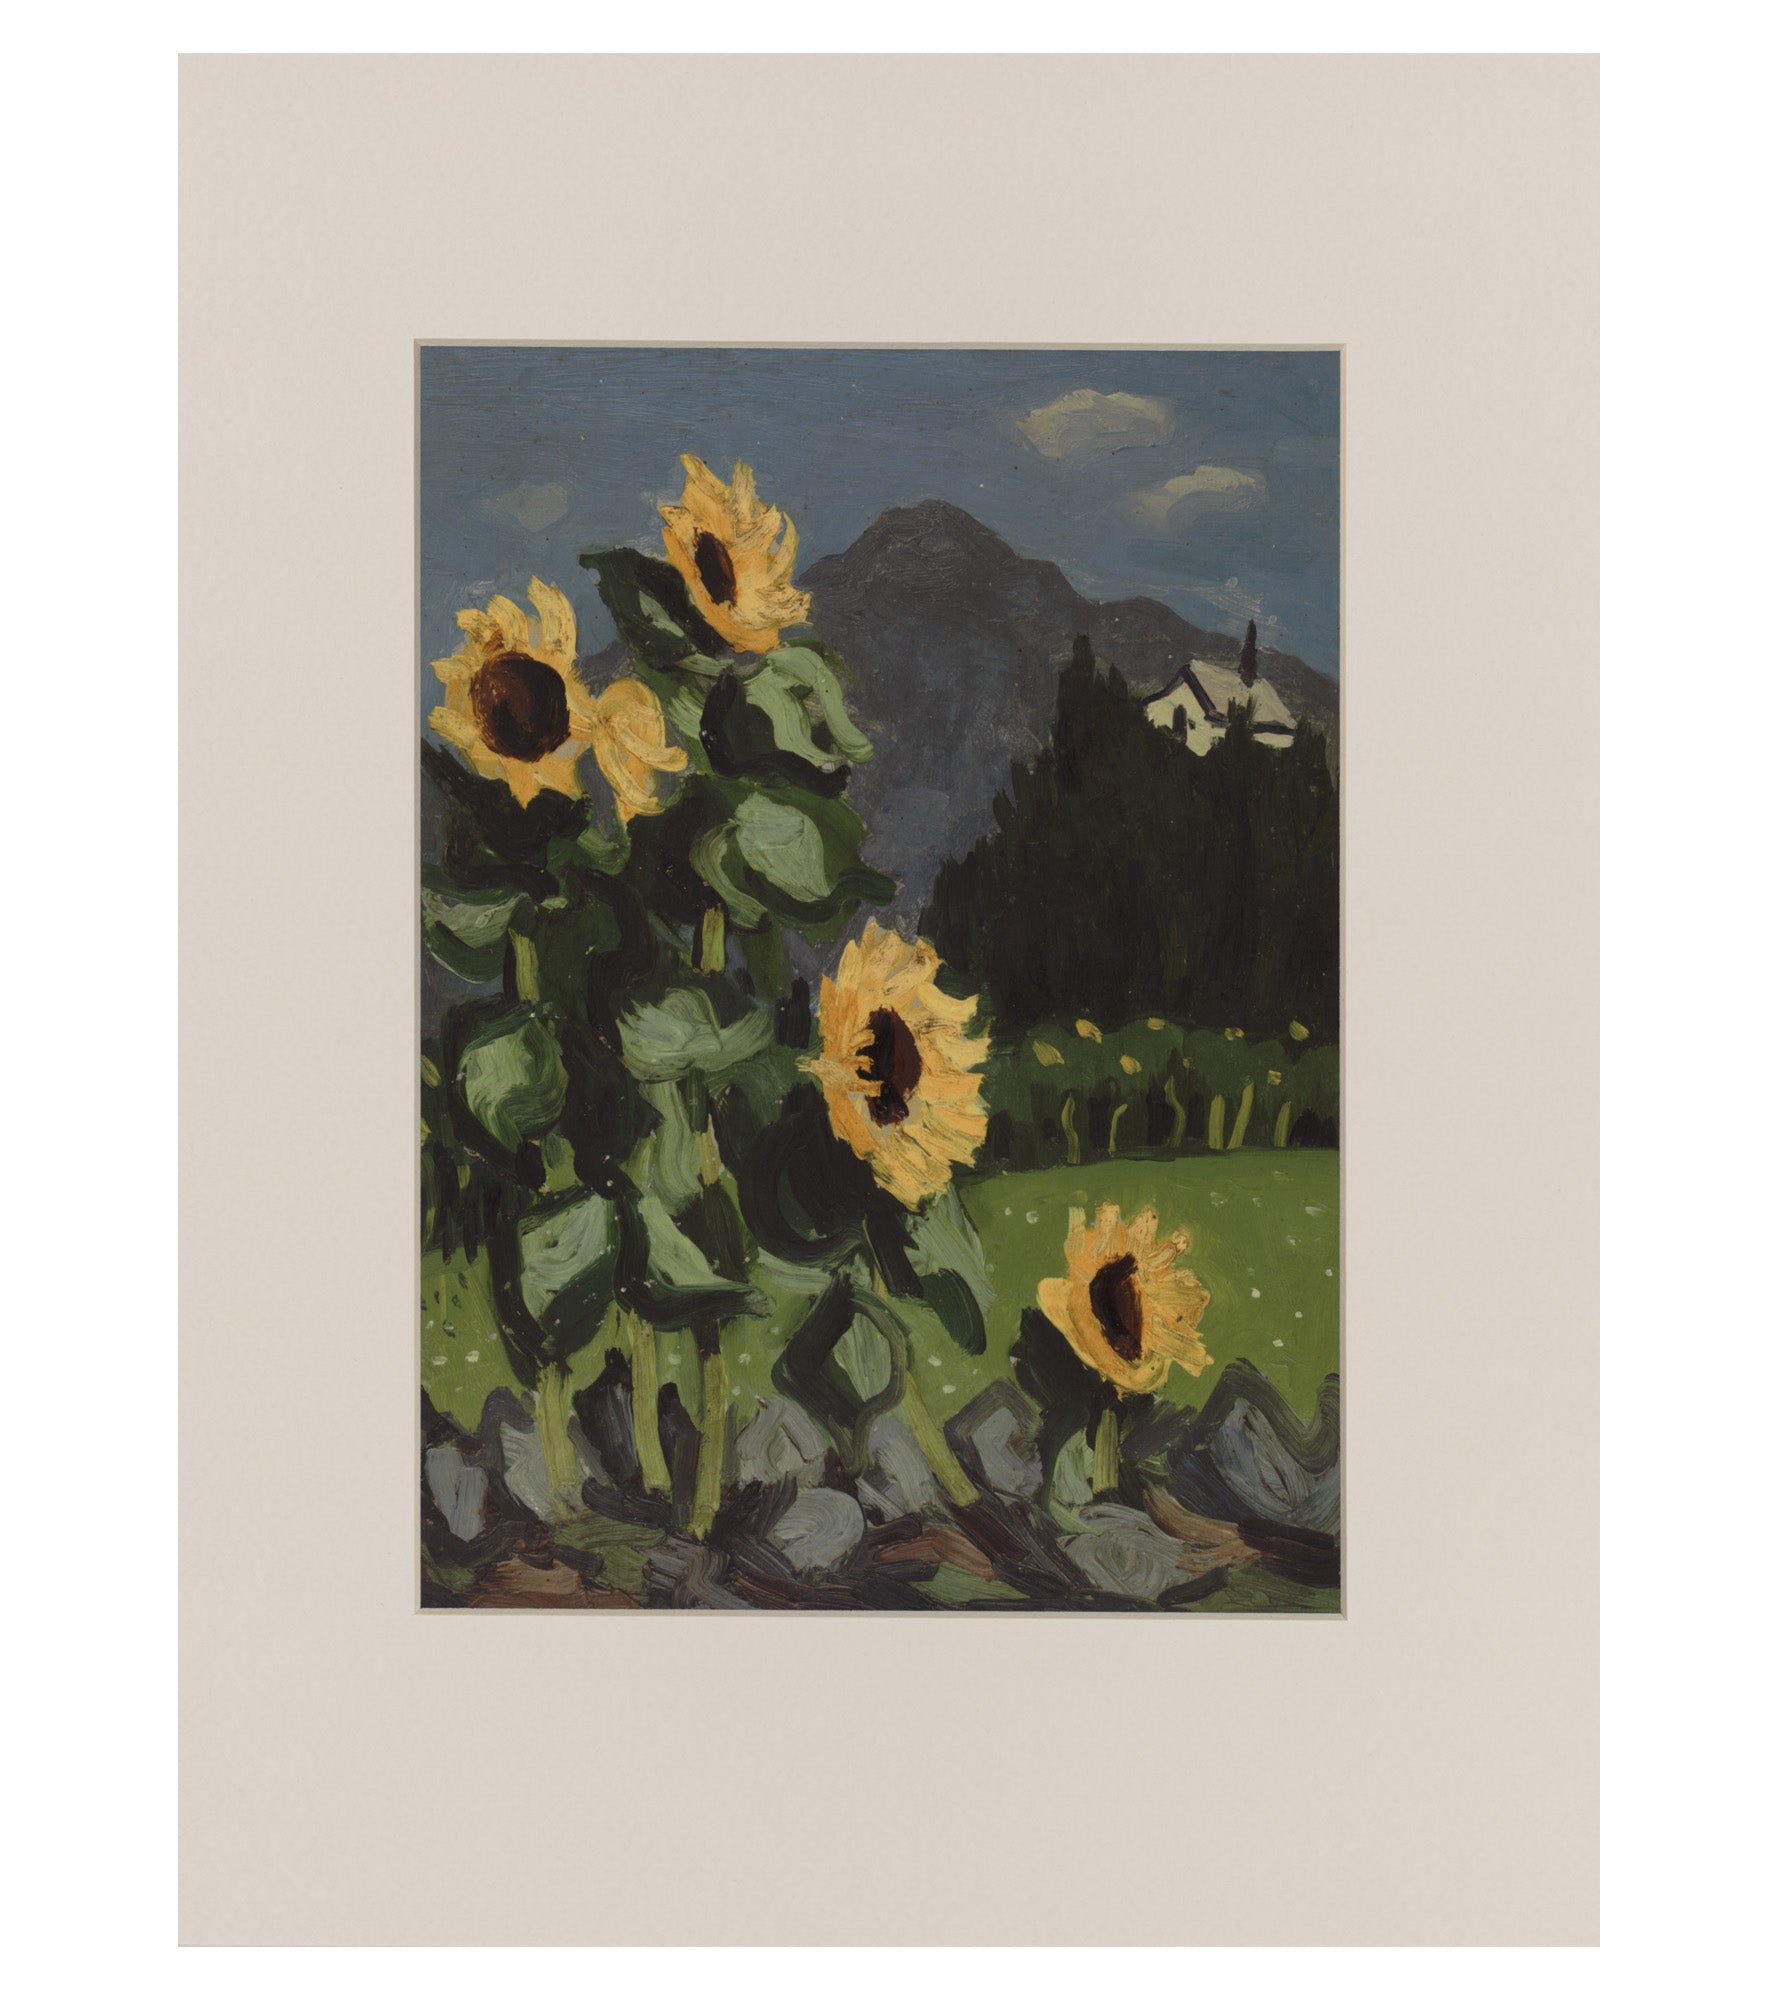 Sunflowers with mountains beyond - Syr Kyffin Williams Print